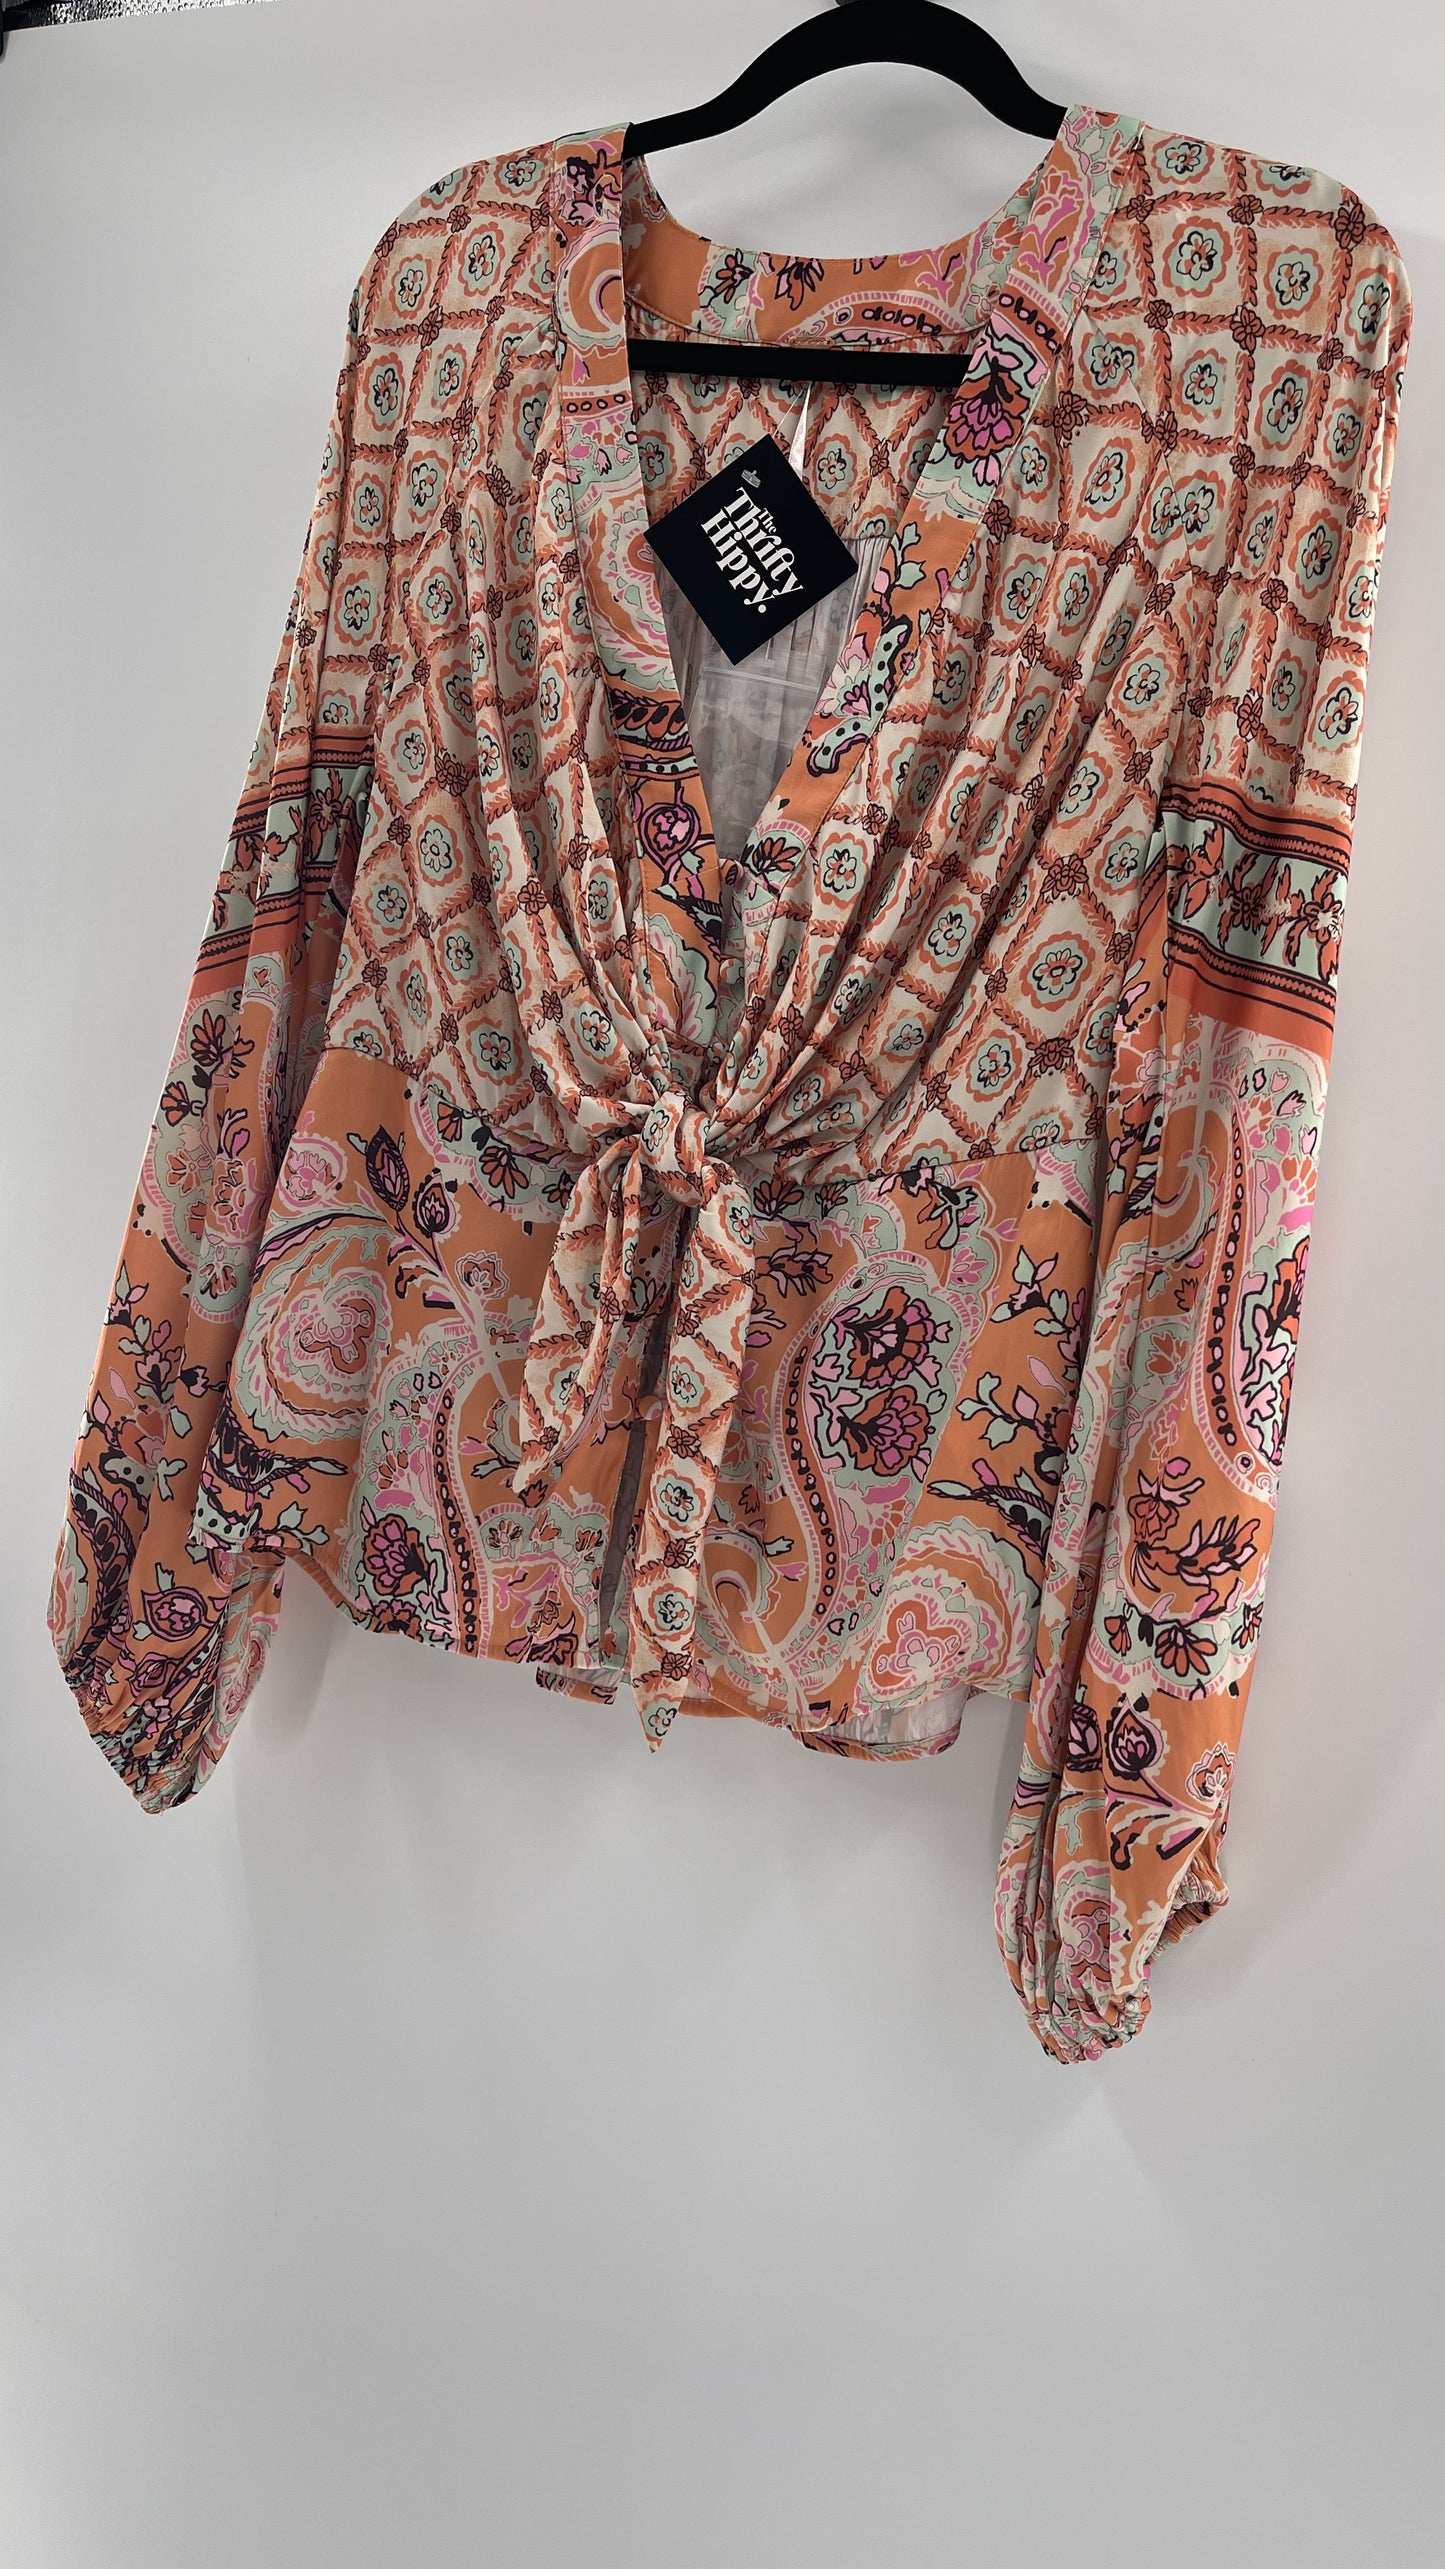 Free People Silky Orange Paisley Tie Front Blouse (XS)